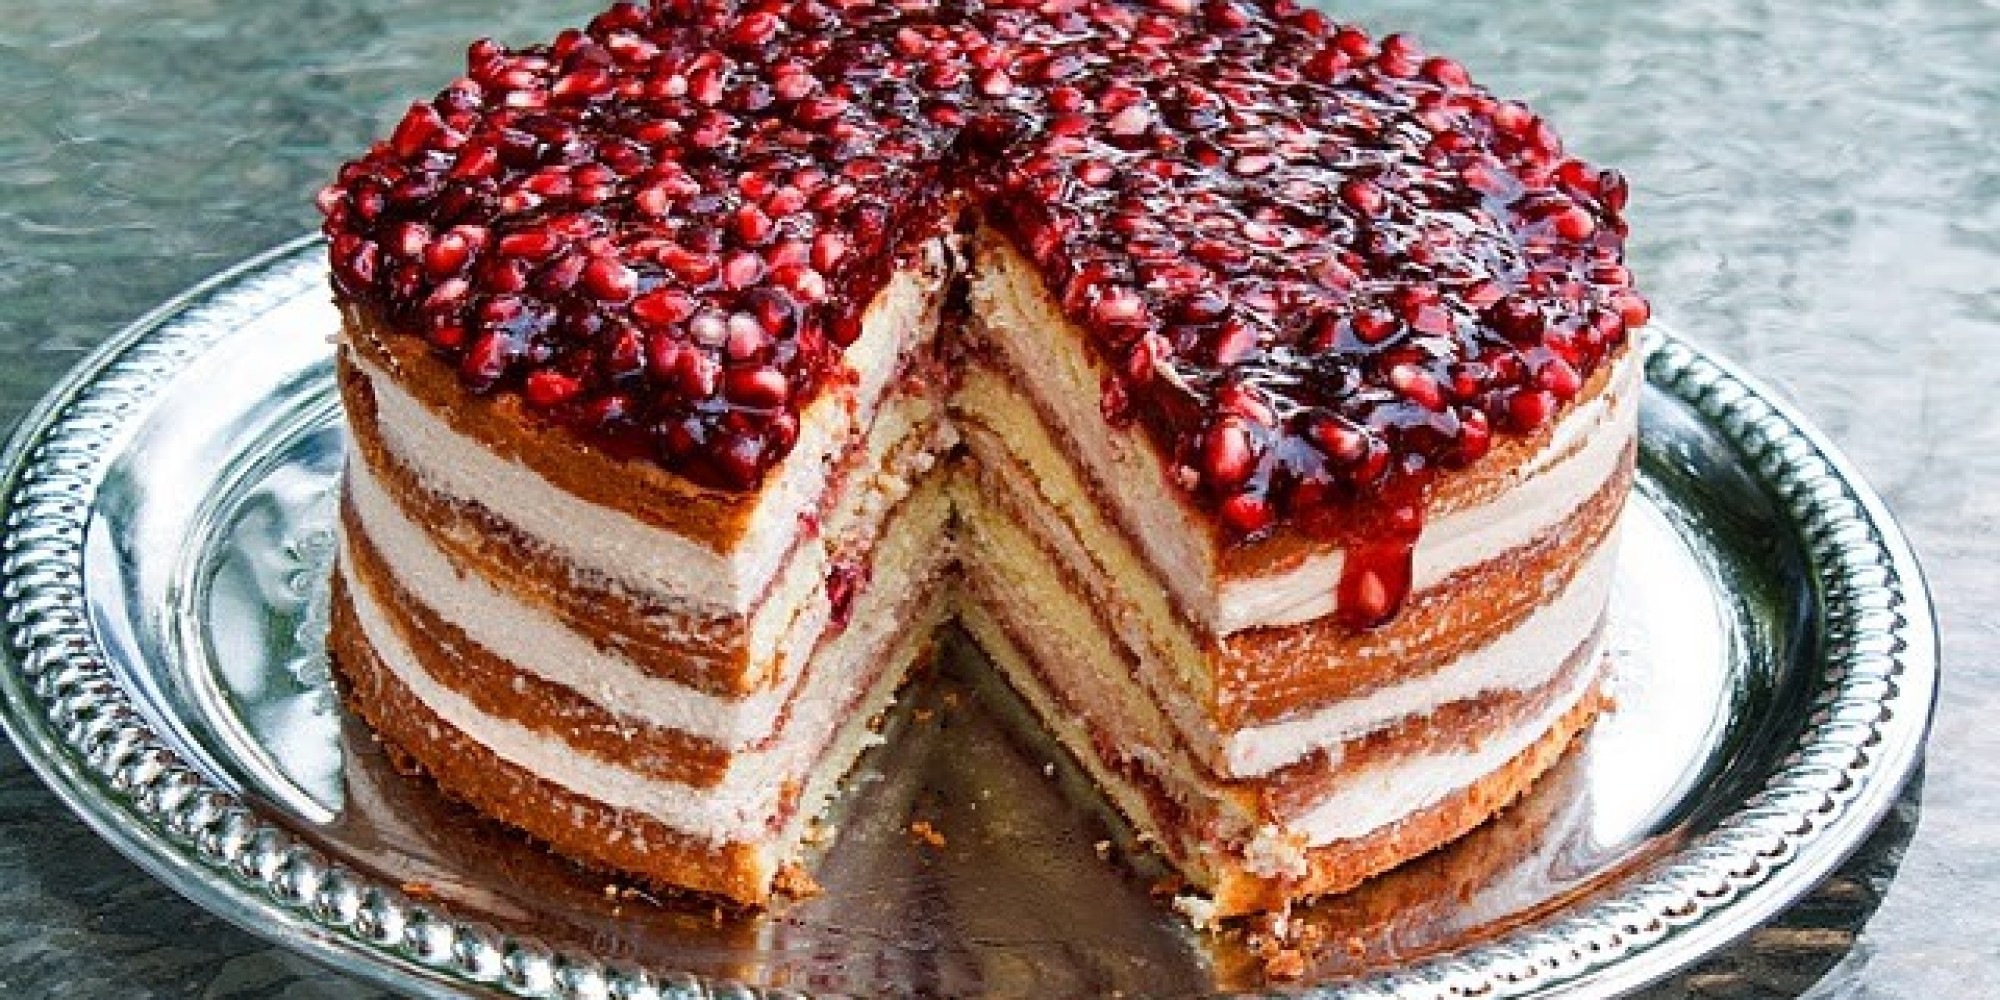 Pictures Of Christmas Desserts
 The Most Stunning Christmas Dessert Recipes Ever